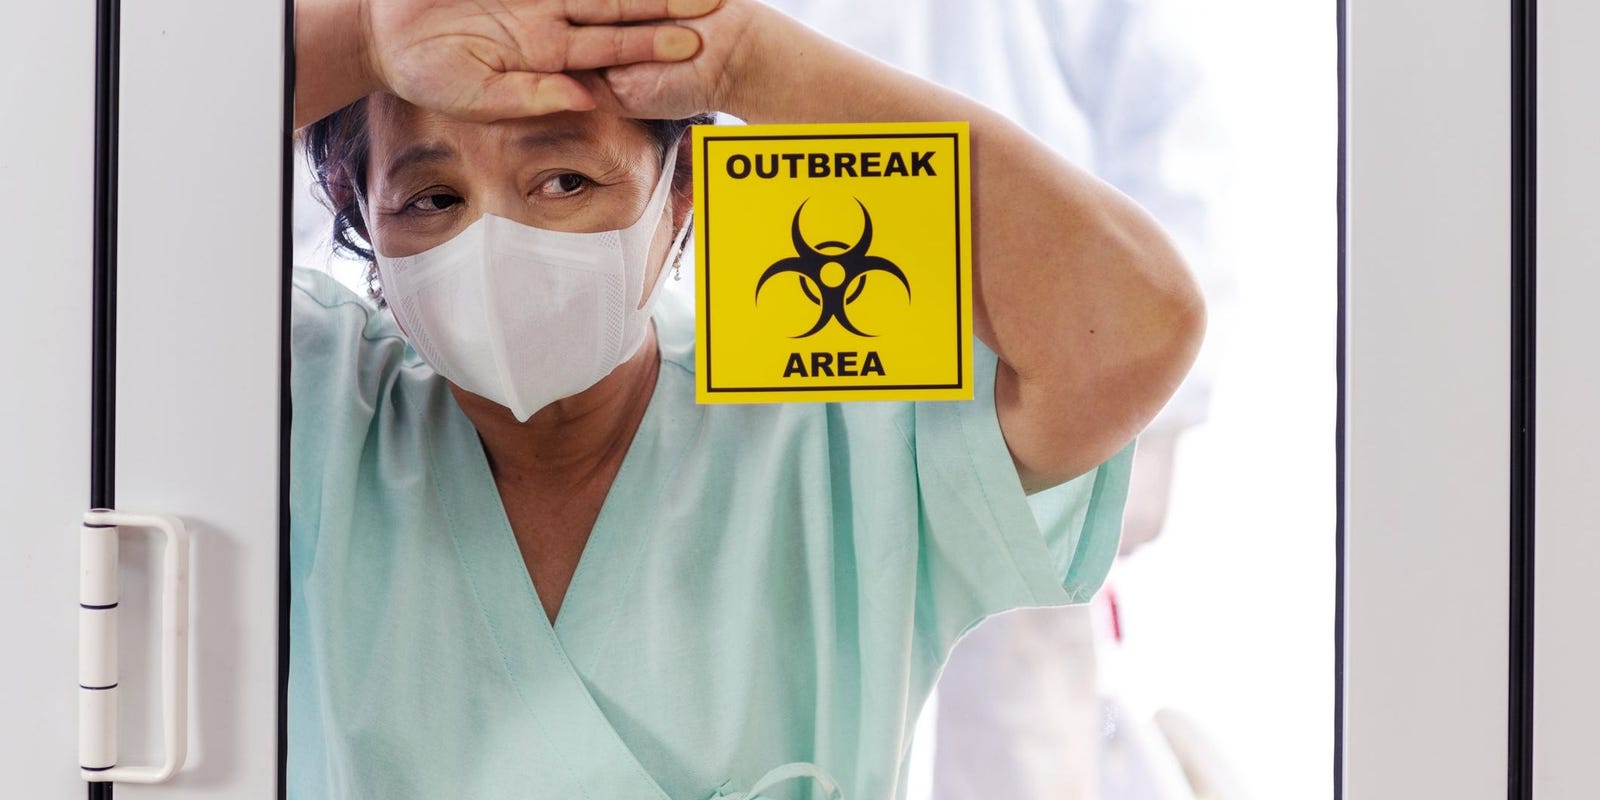 Elective surgeries continue at some US hospitals during coronavirus outbreak despite supply and safety worries